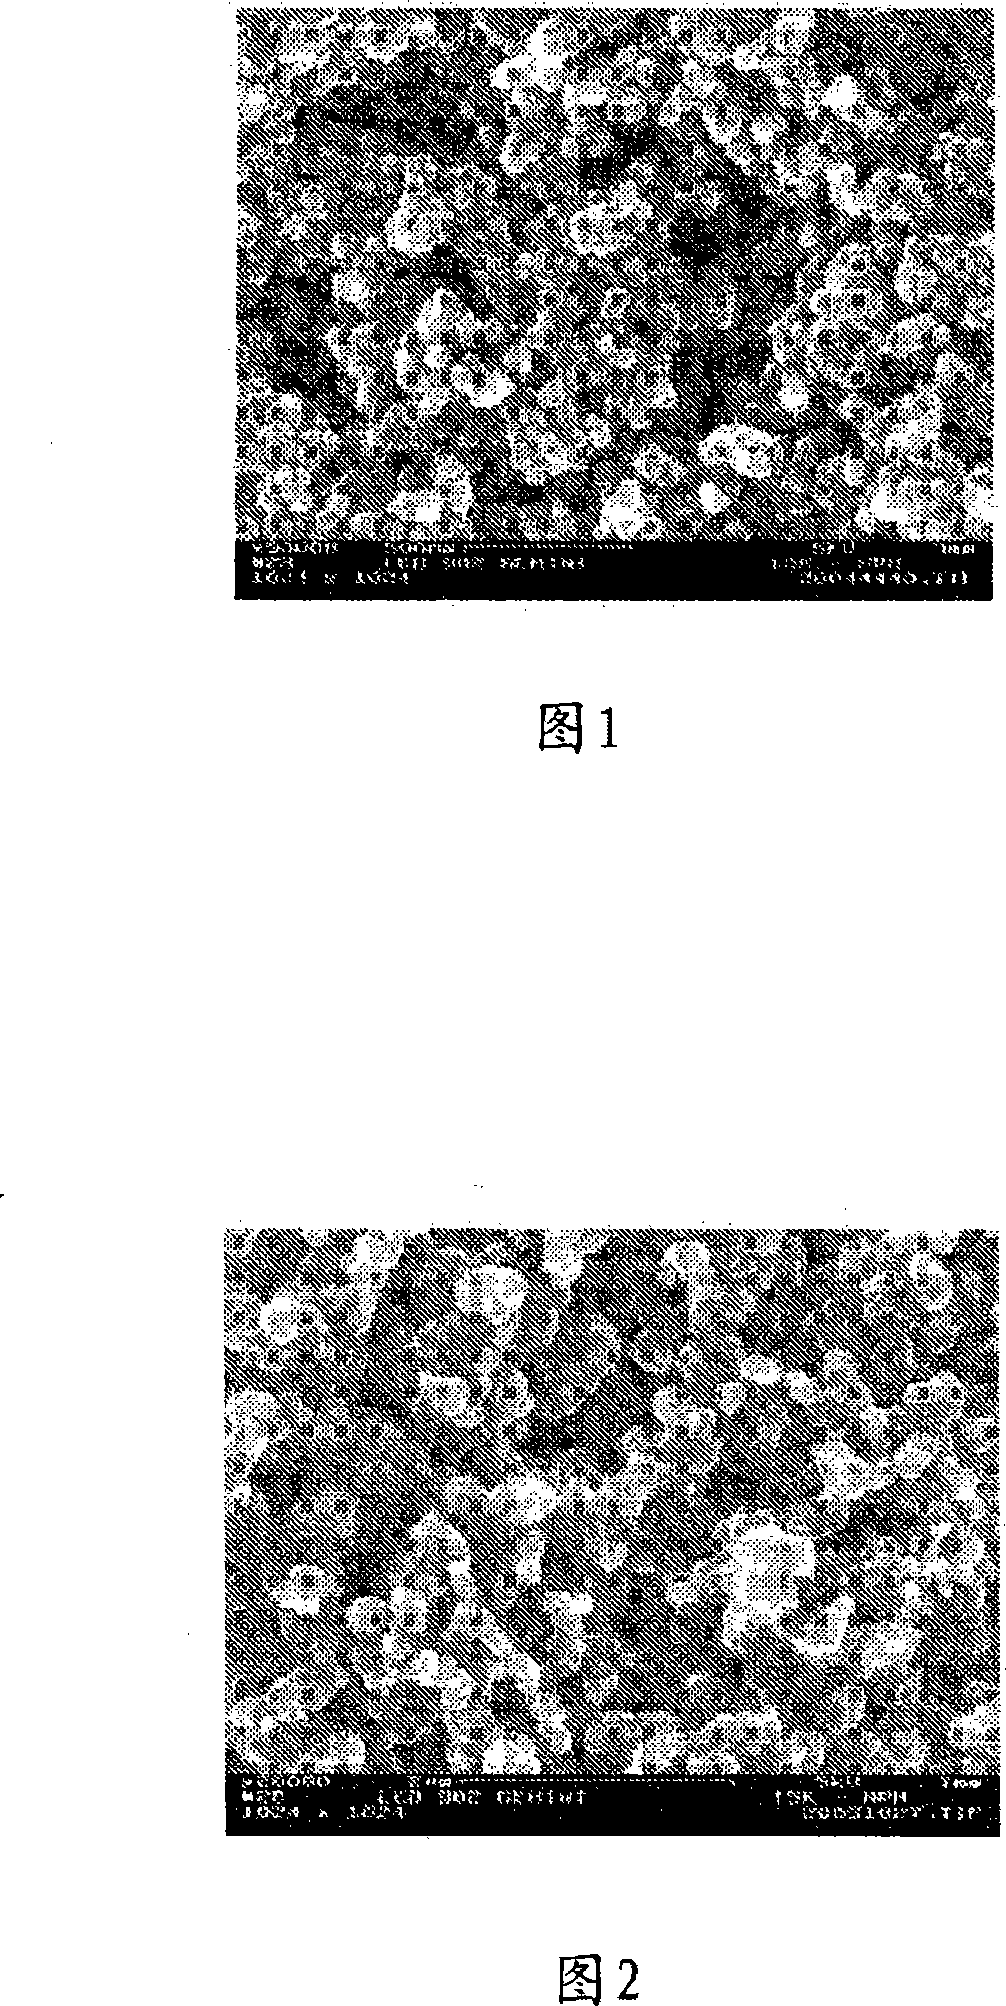 Process for production of porous reticulated composite materials